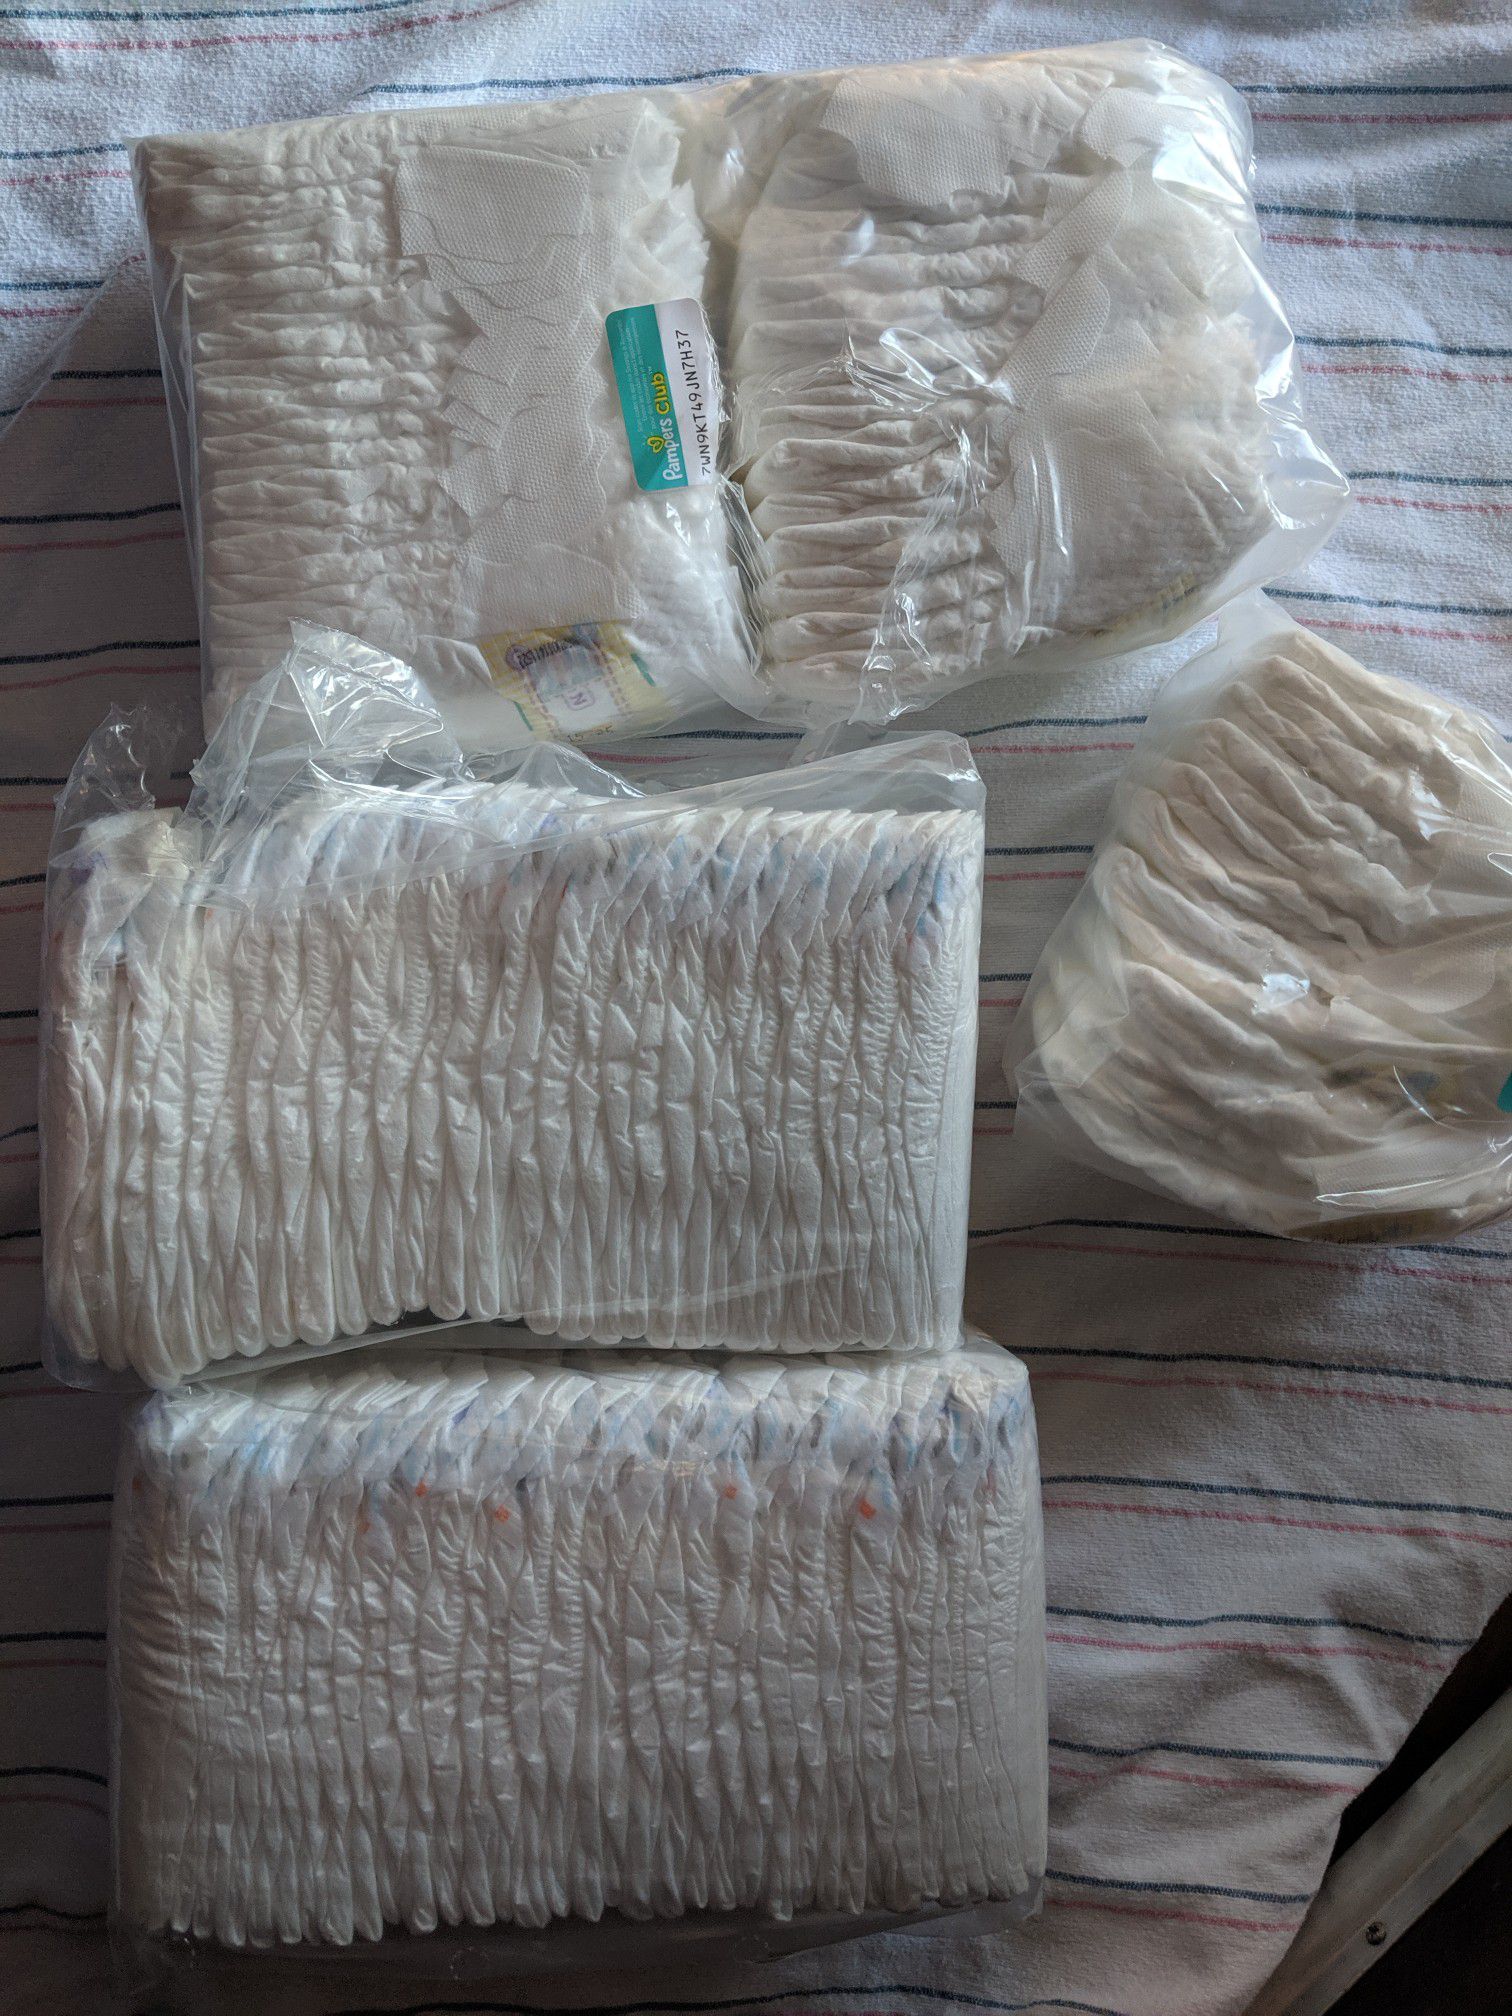 Diapers (about 145)